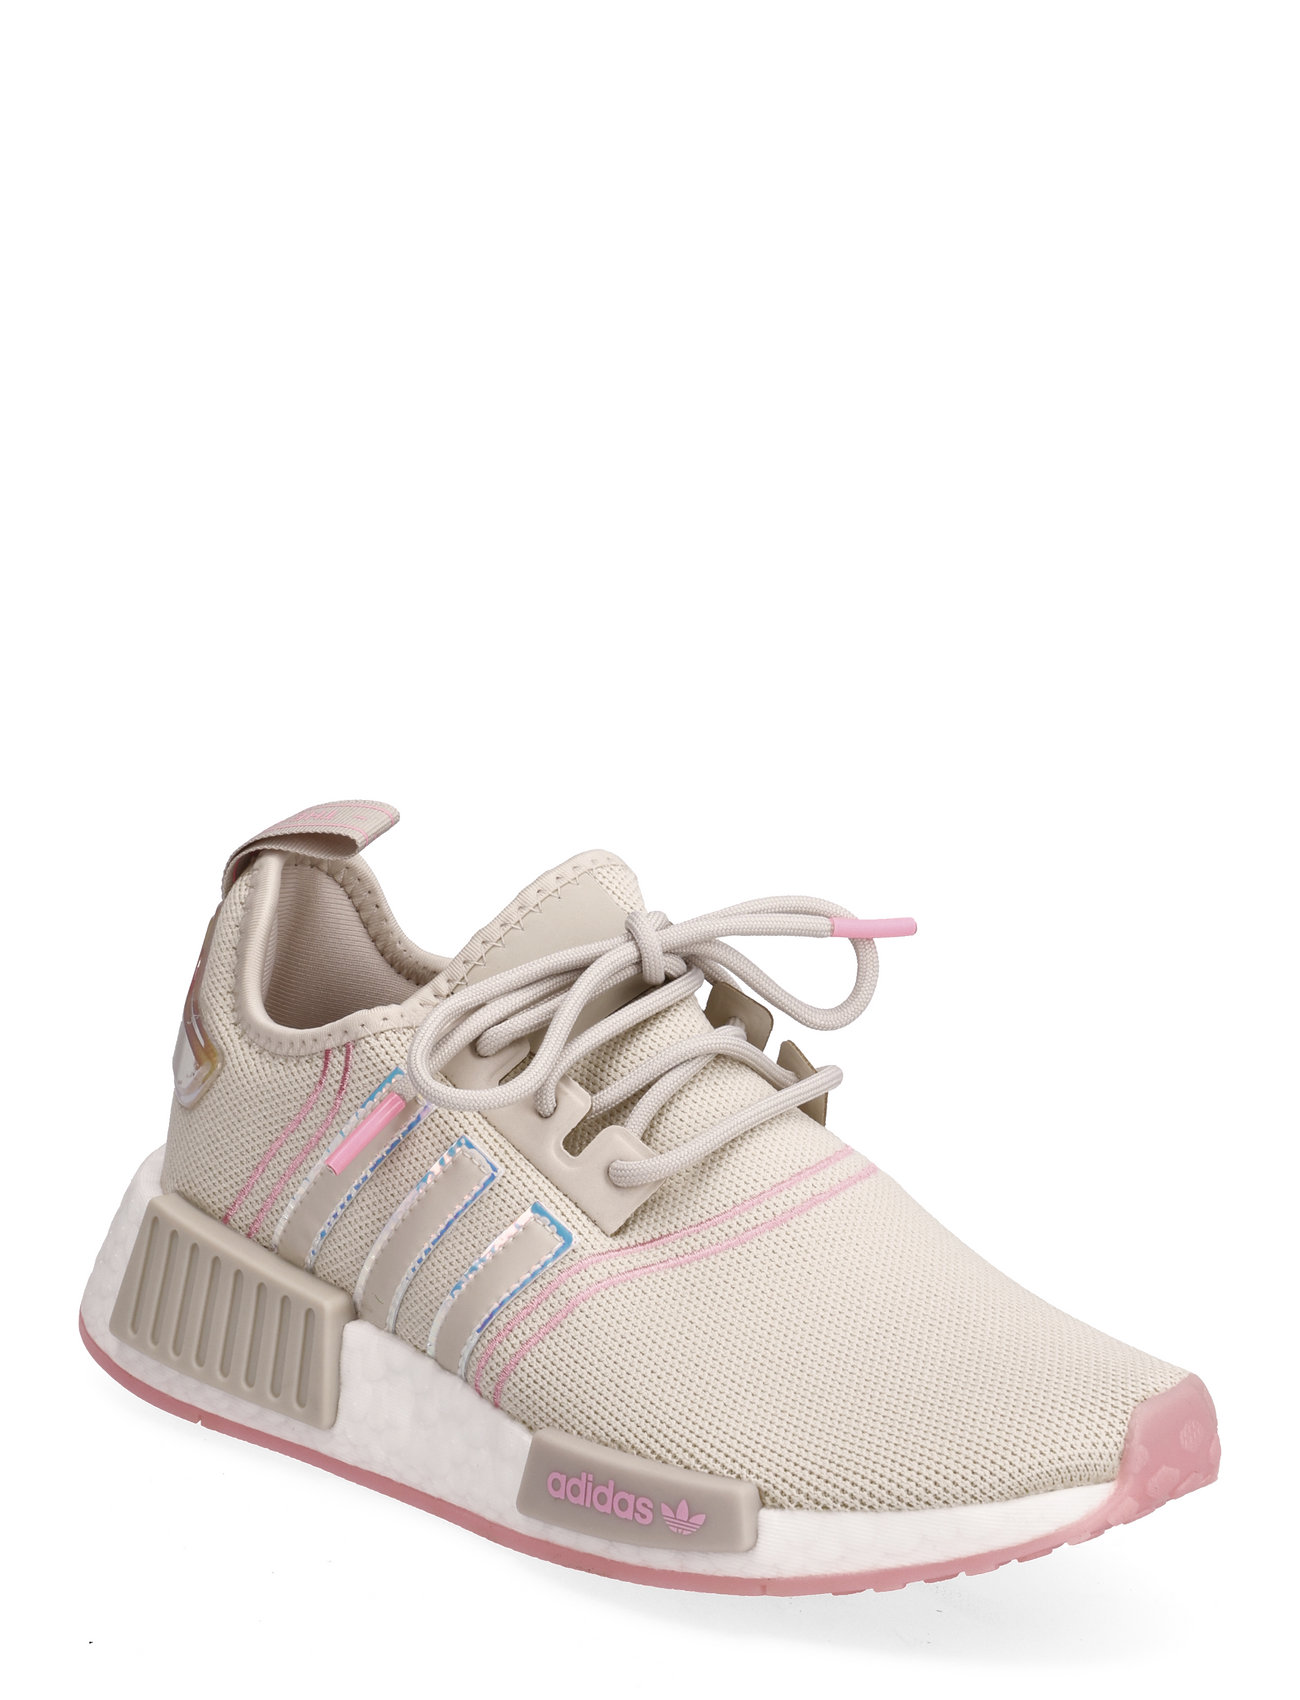 adidas Originals Nmd_r1 Shoes Lage sneakers Boozt.com